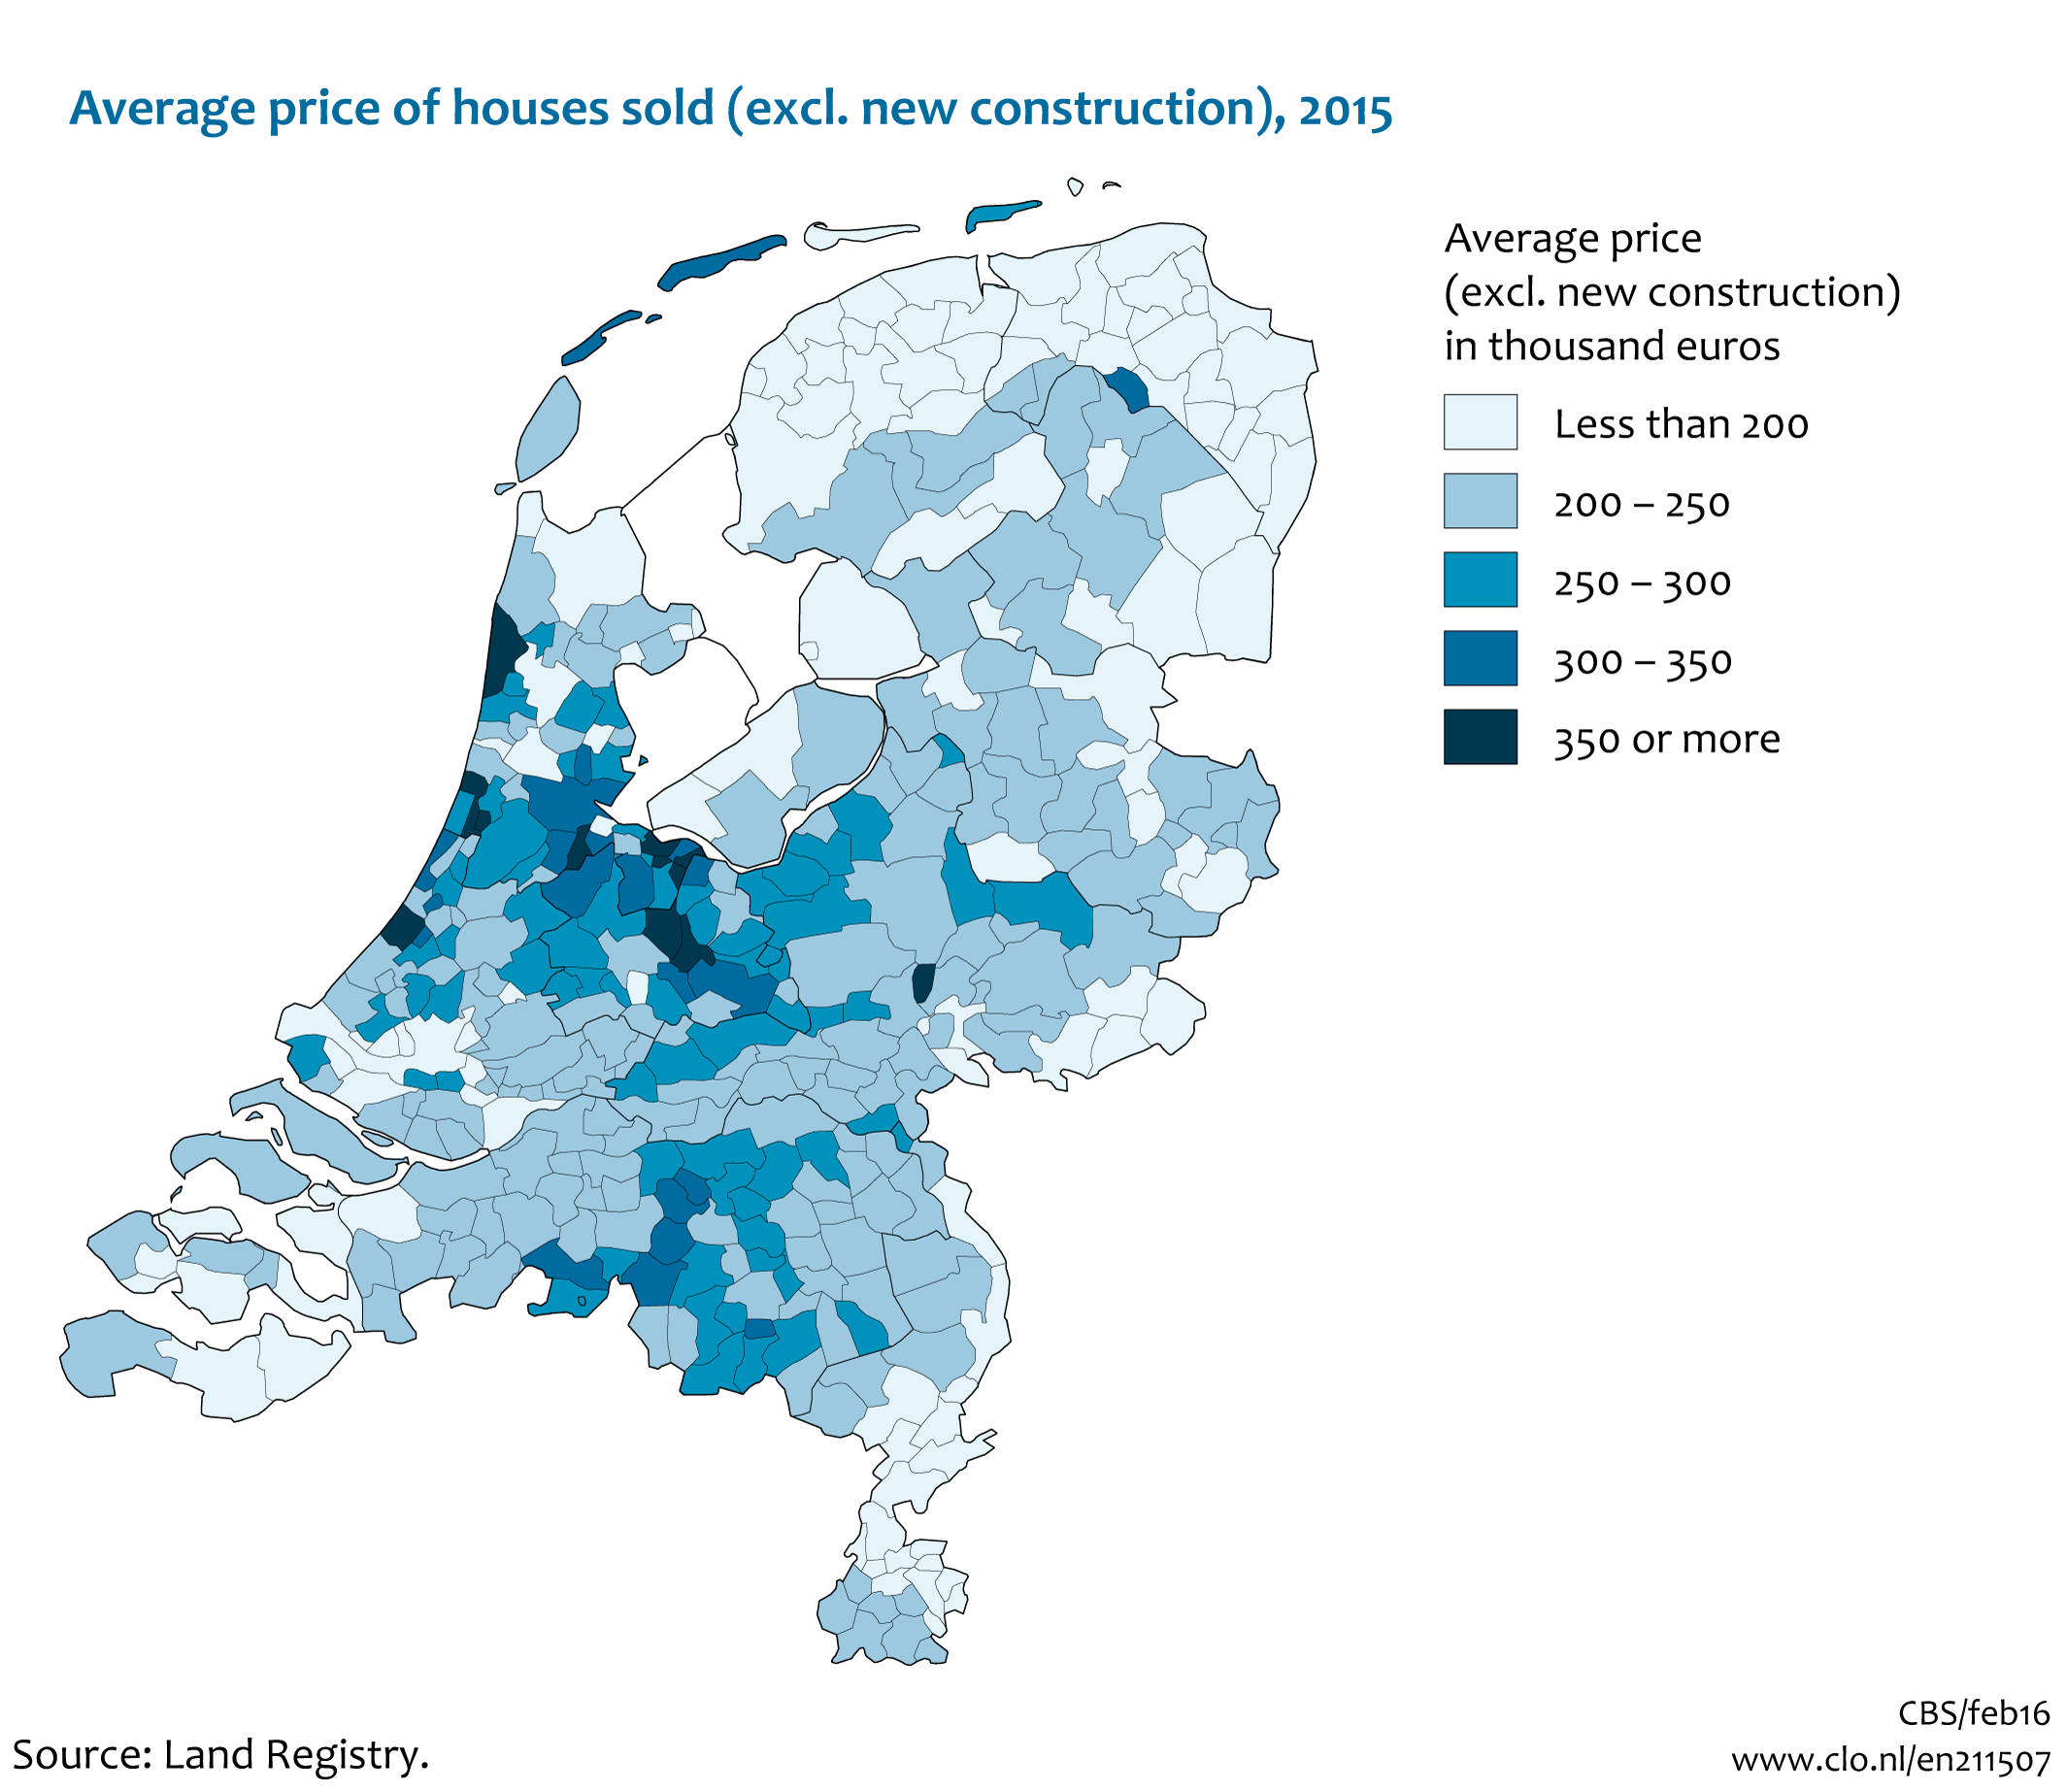 Image  Average price of houses sold (excl. new construction), 2015. The image is further explained in the text.